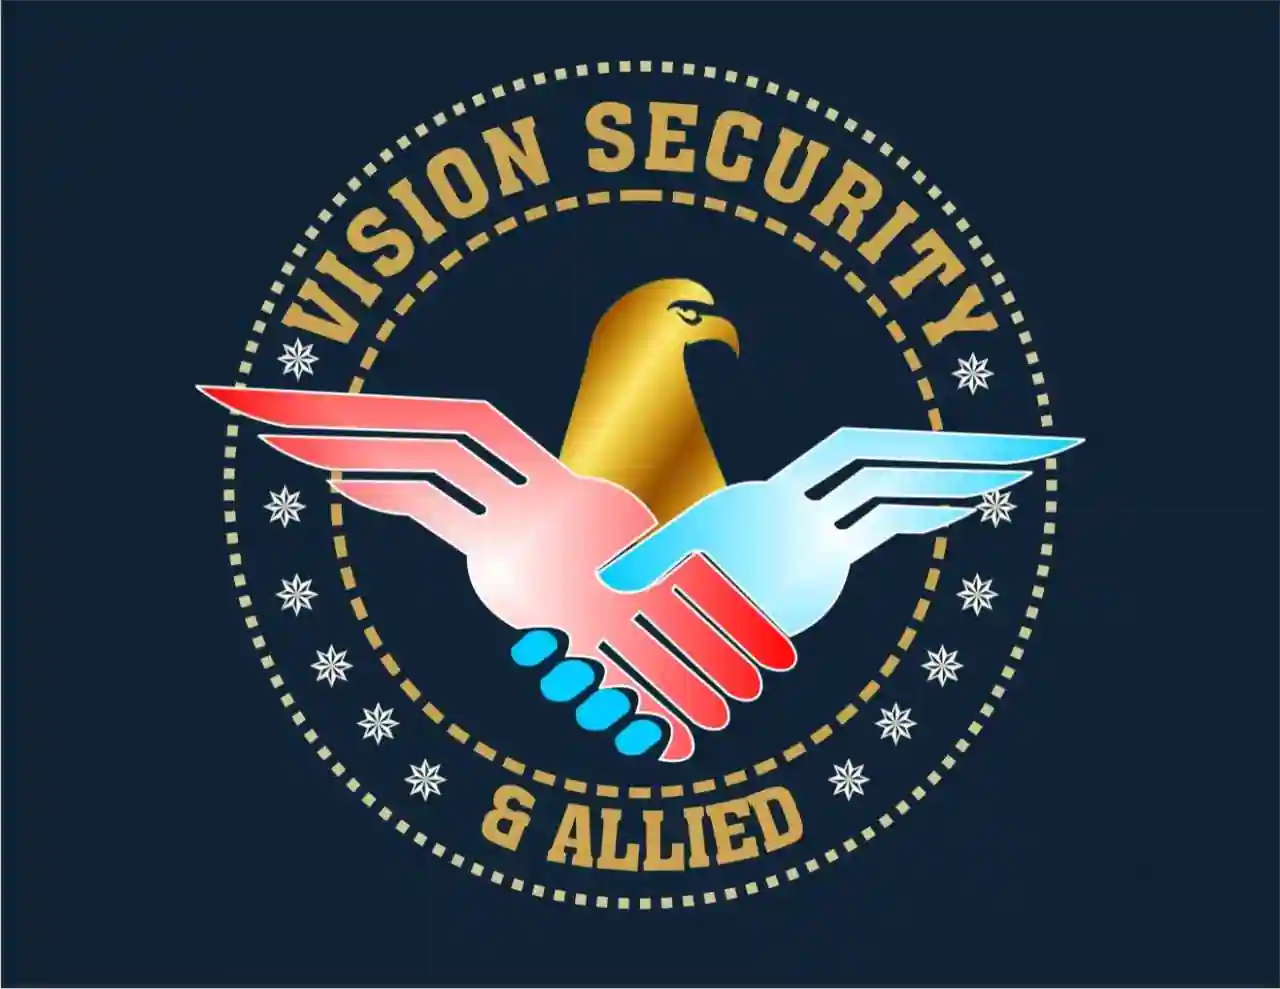 Vision Security & Allied